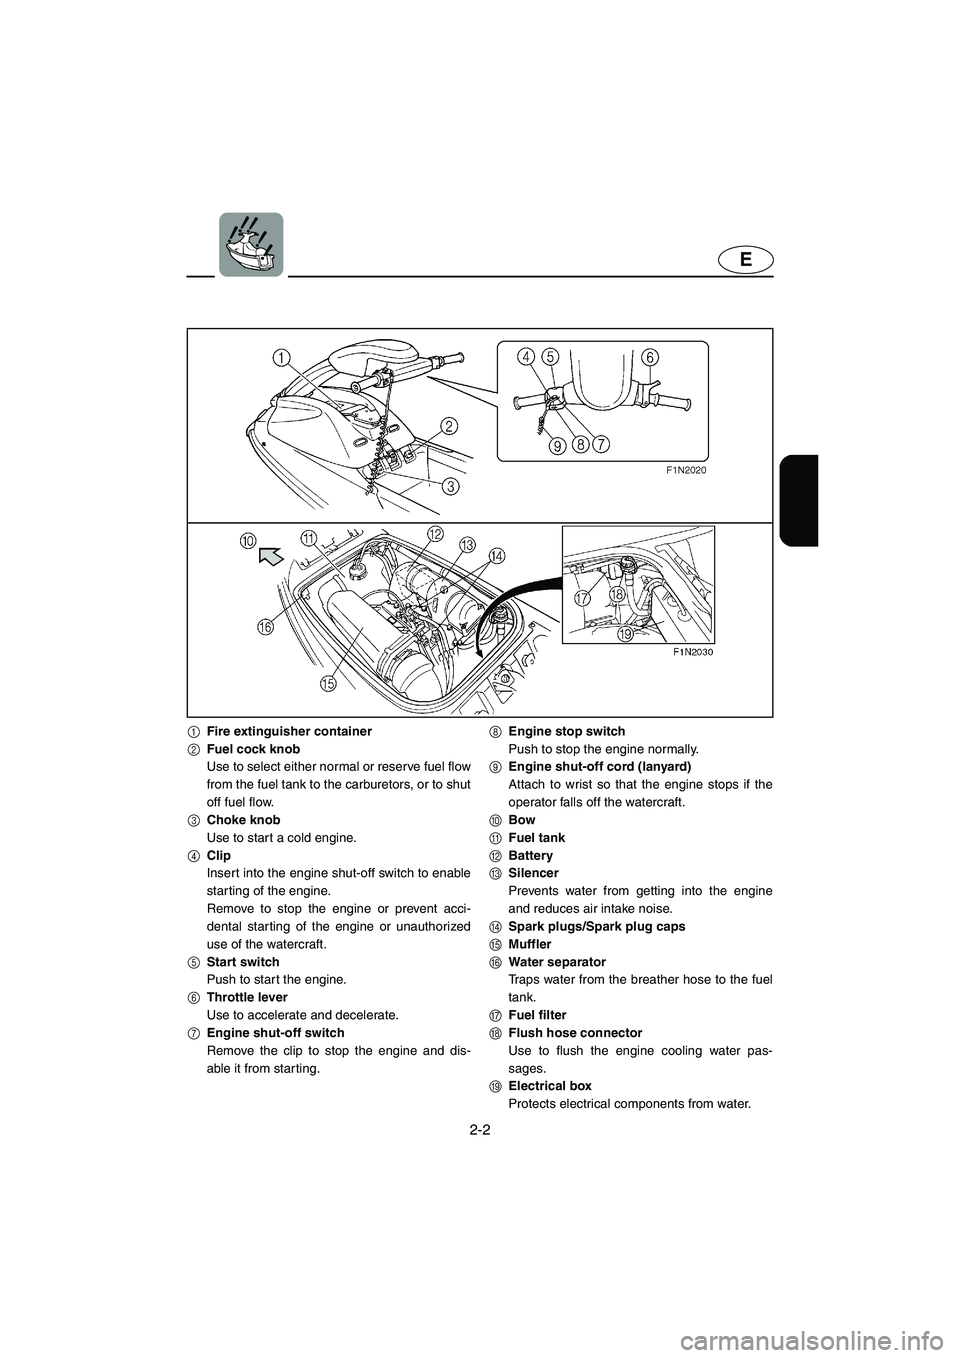 YAMAHA SUPERJET 2003  Owners Manual 2-2
E
1Fire extinguisher container
2Fuel cock knob
Use to select either normal or reserve fuel flow
from the fuel tank to the carburetors, or to shut
off fuel flow.
3Choke knob
Use to start a cold eng